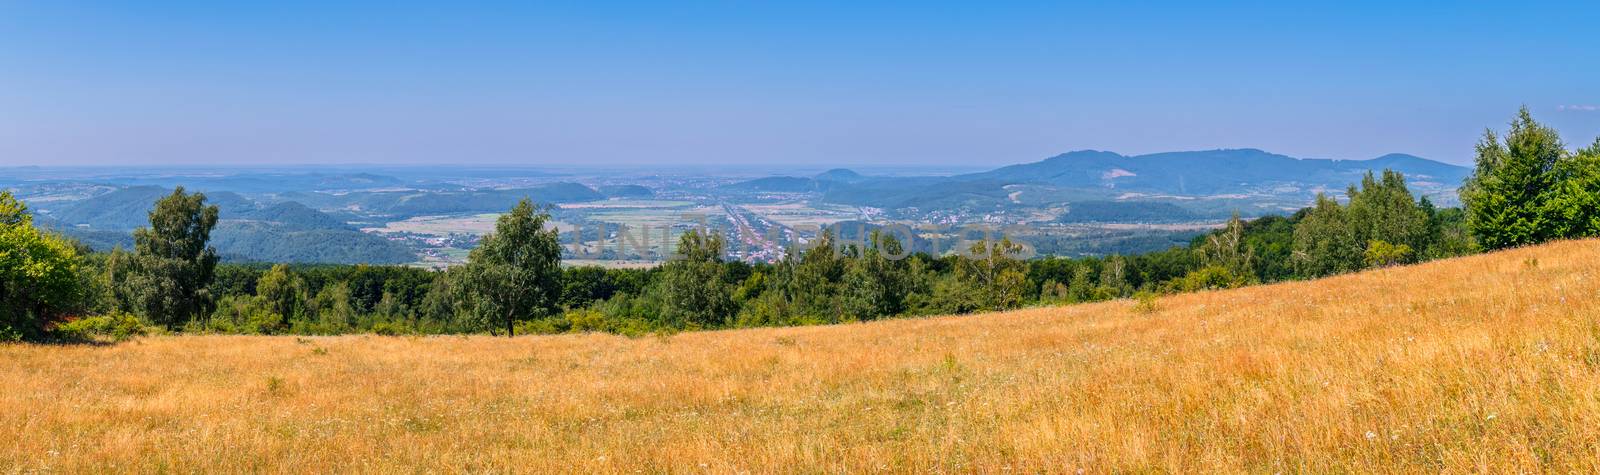 delightful panorama from the yellow slope to the city lying in a mountain valley by Adamchuk